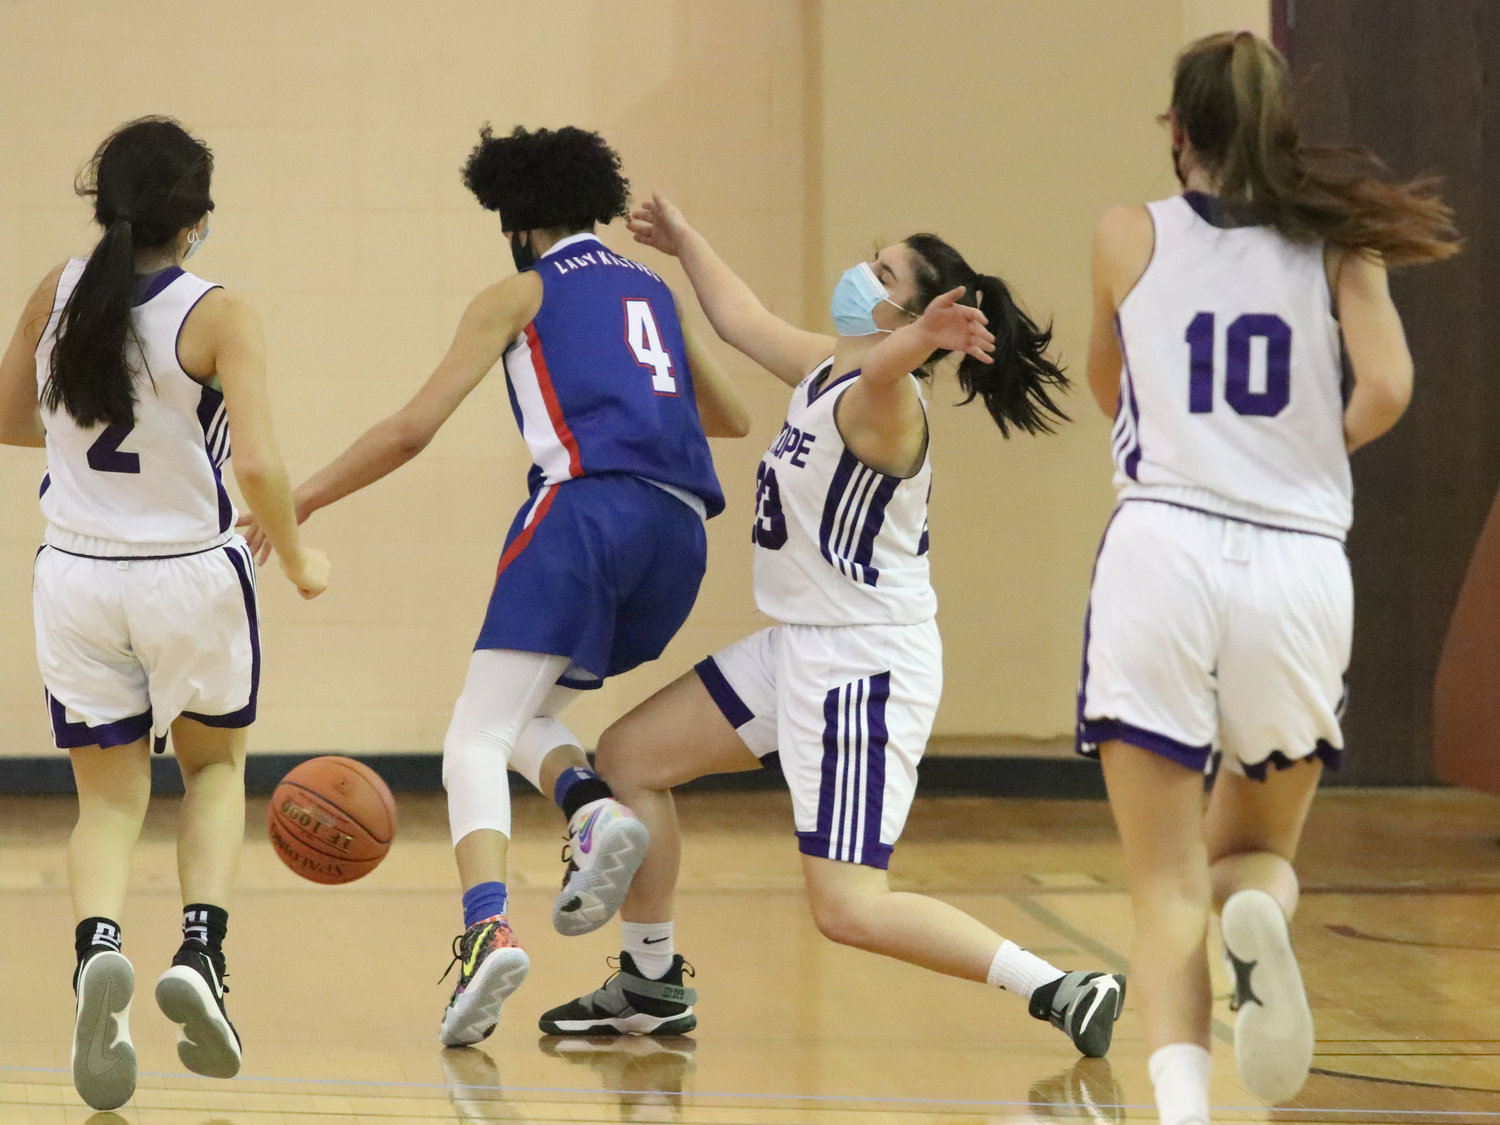 Sophomore guard Abby Razzino looks to score from under the basket. Razzino made six steals during the game according to stats accumulated by assistant coach James Brackett.